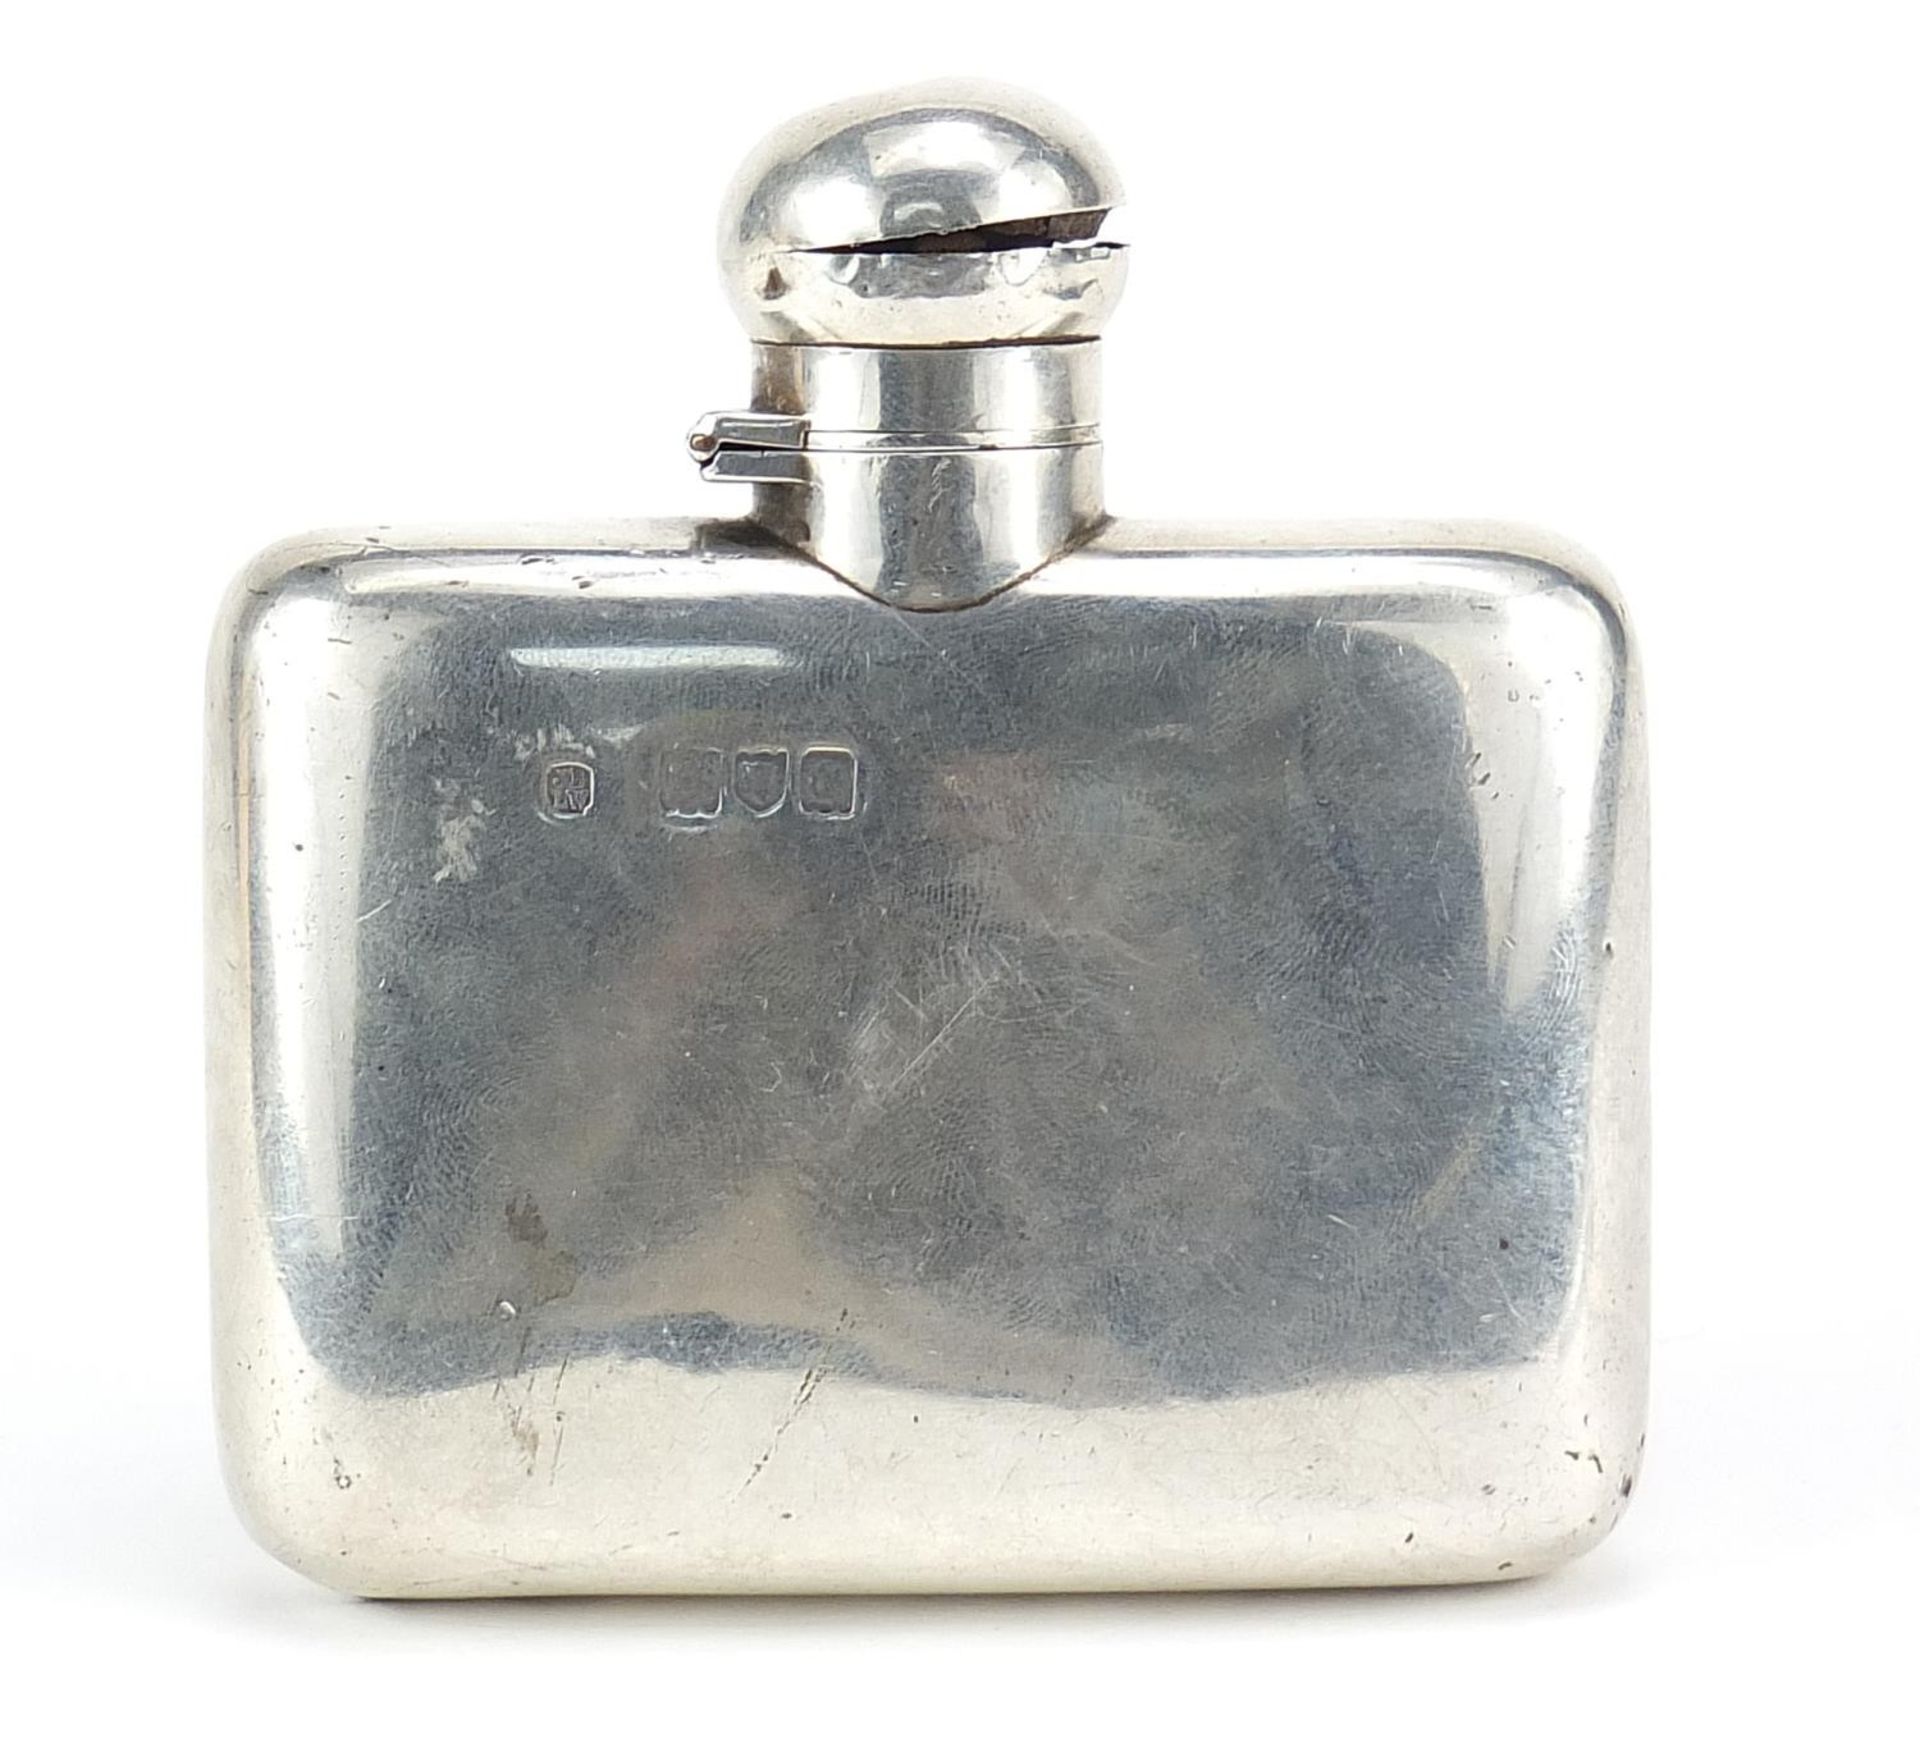 James Samuel Bell and Louis Willmott, Victorian silver hip flask with bayonet design lid, London